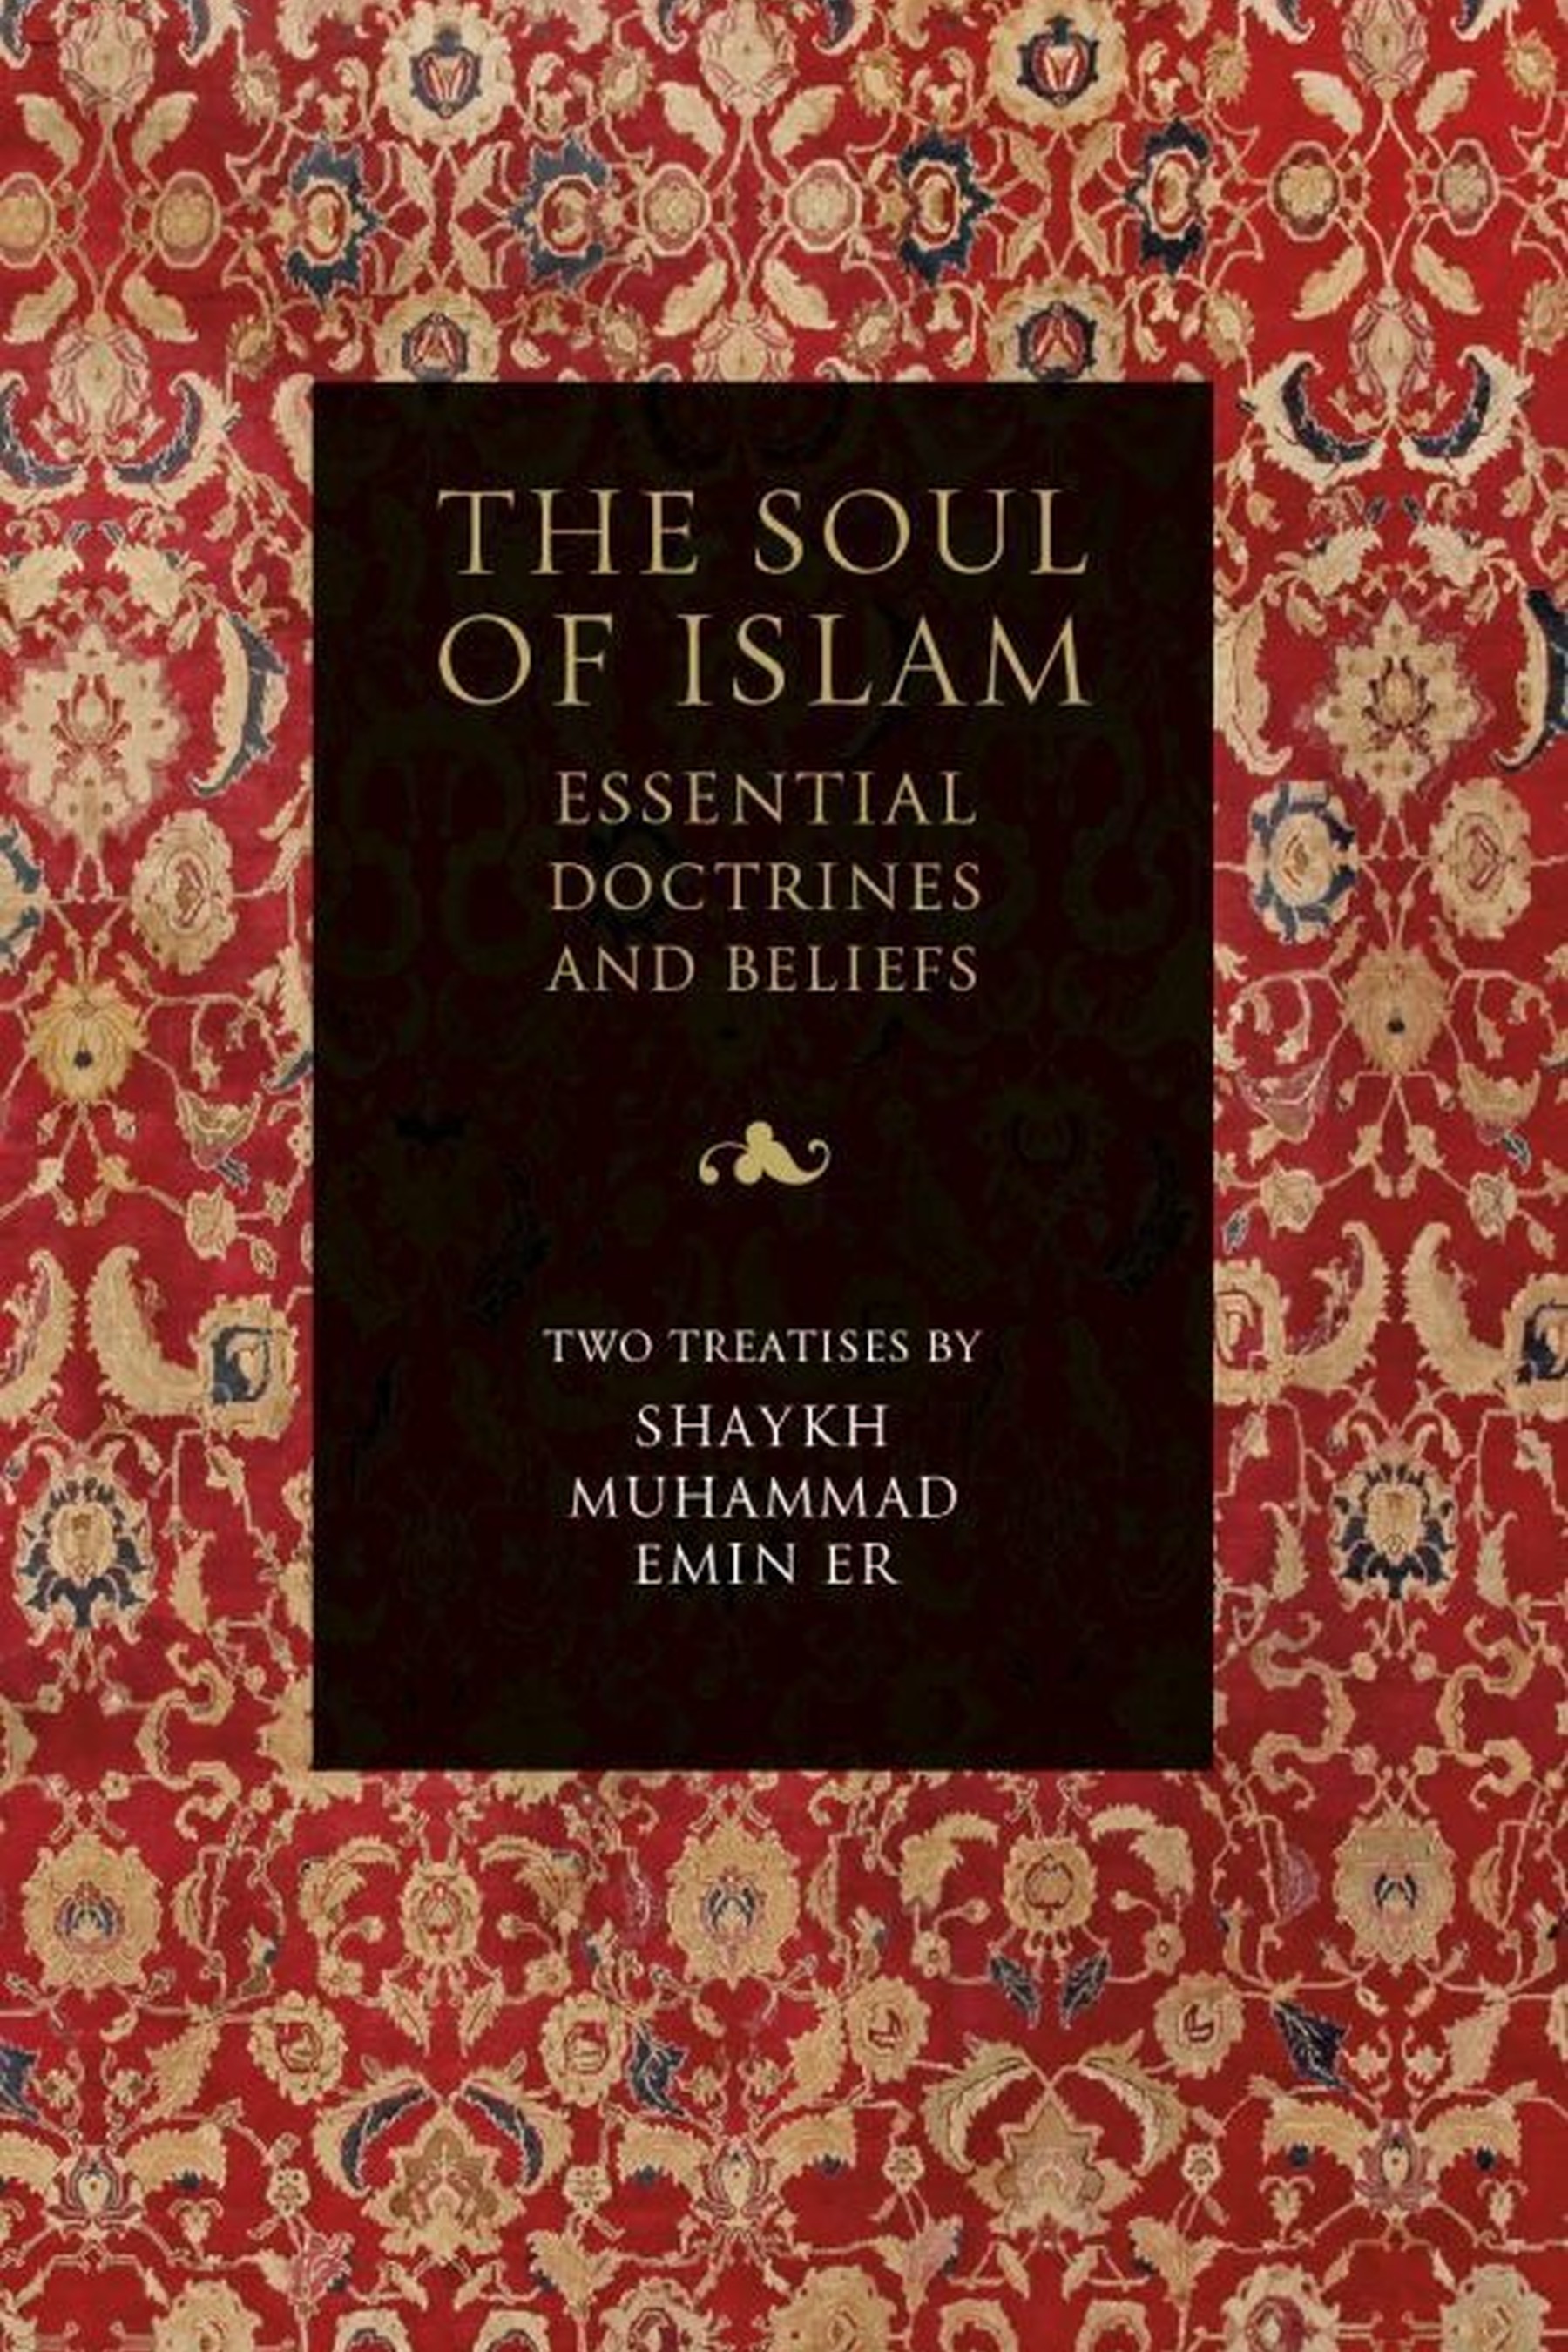 The soul of islam essential doctrines and beliefs